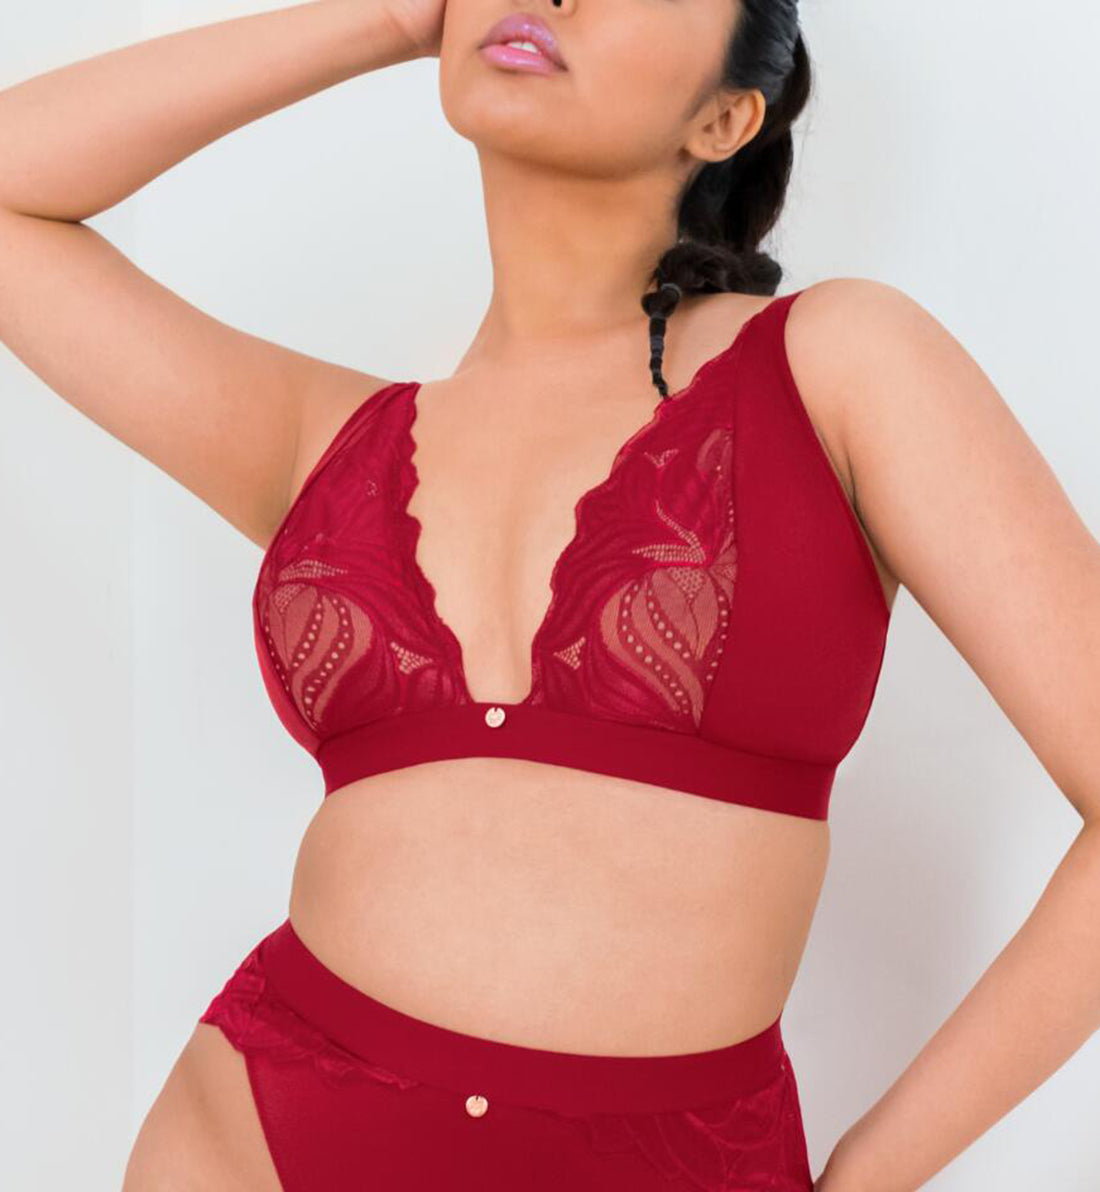 Scantilly by Curvy Kate Indulgence Plunge Bralette (ST010110),Small,Red - Red,Small